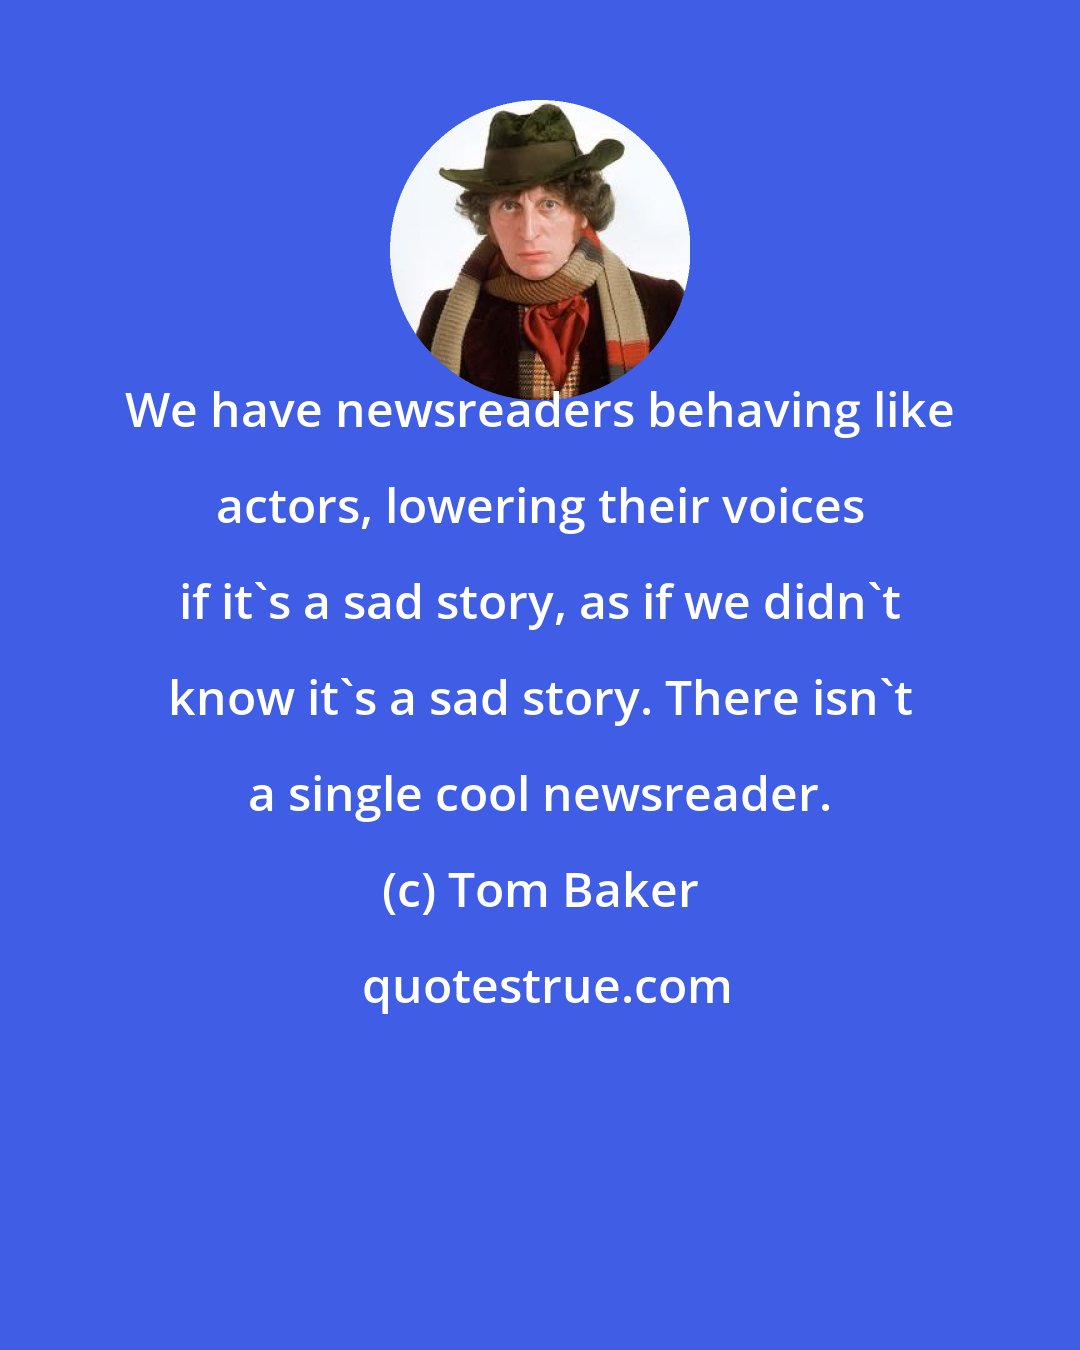 Tom Baker: We have newsreaders behaving like actors, lowering their voices if it's a sad story, as if we didn't know it's a sad story. There isn't a single cool newsreader.